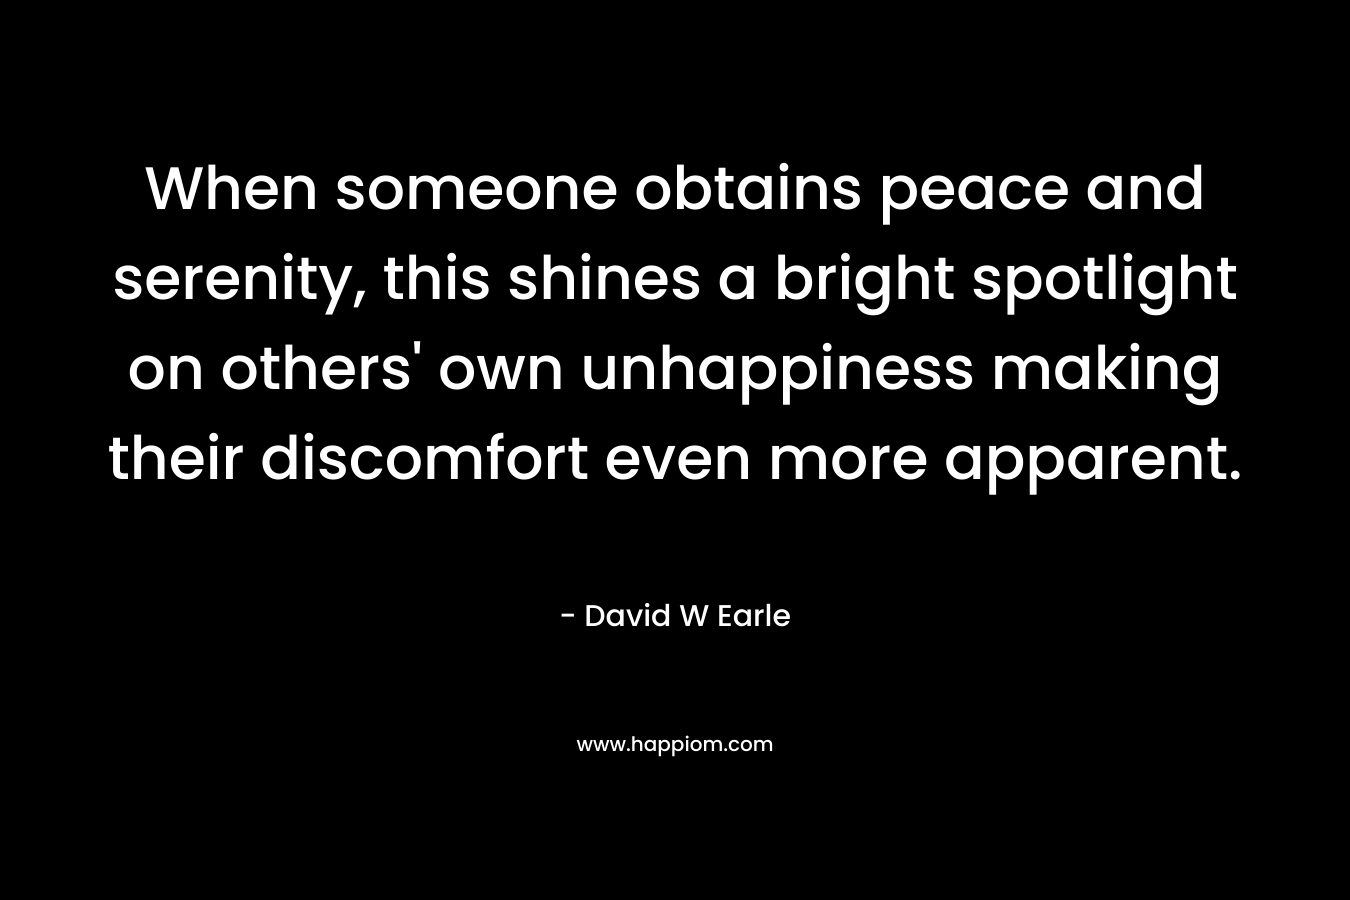 When someone obtains peace and serenity, this shines a bright spotlight on others’ own unhappiness making their discomfort even more apparent. – David W Earle